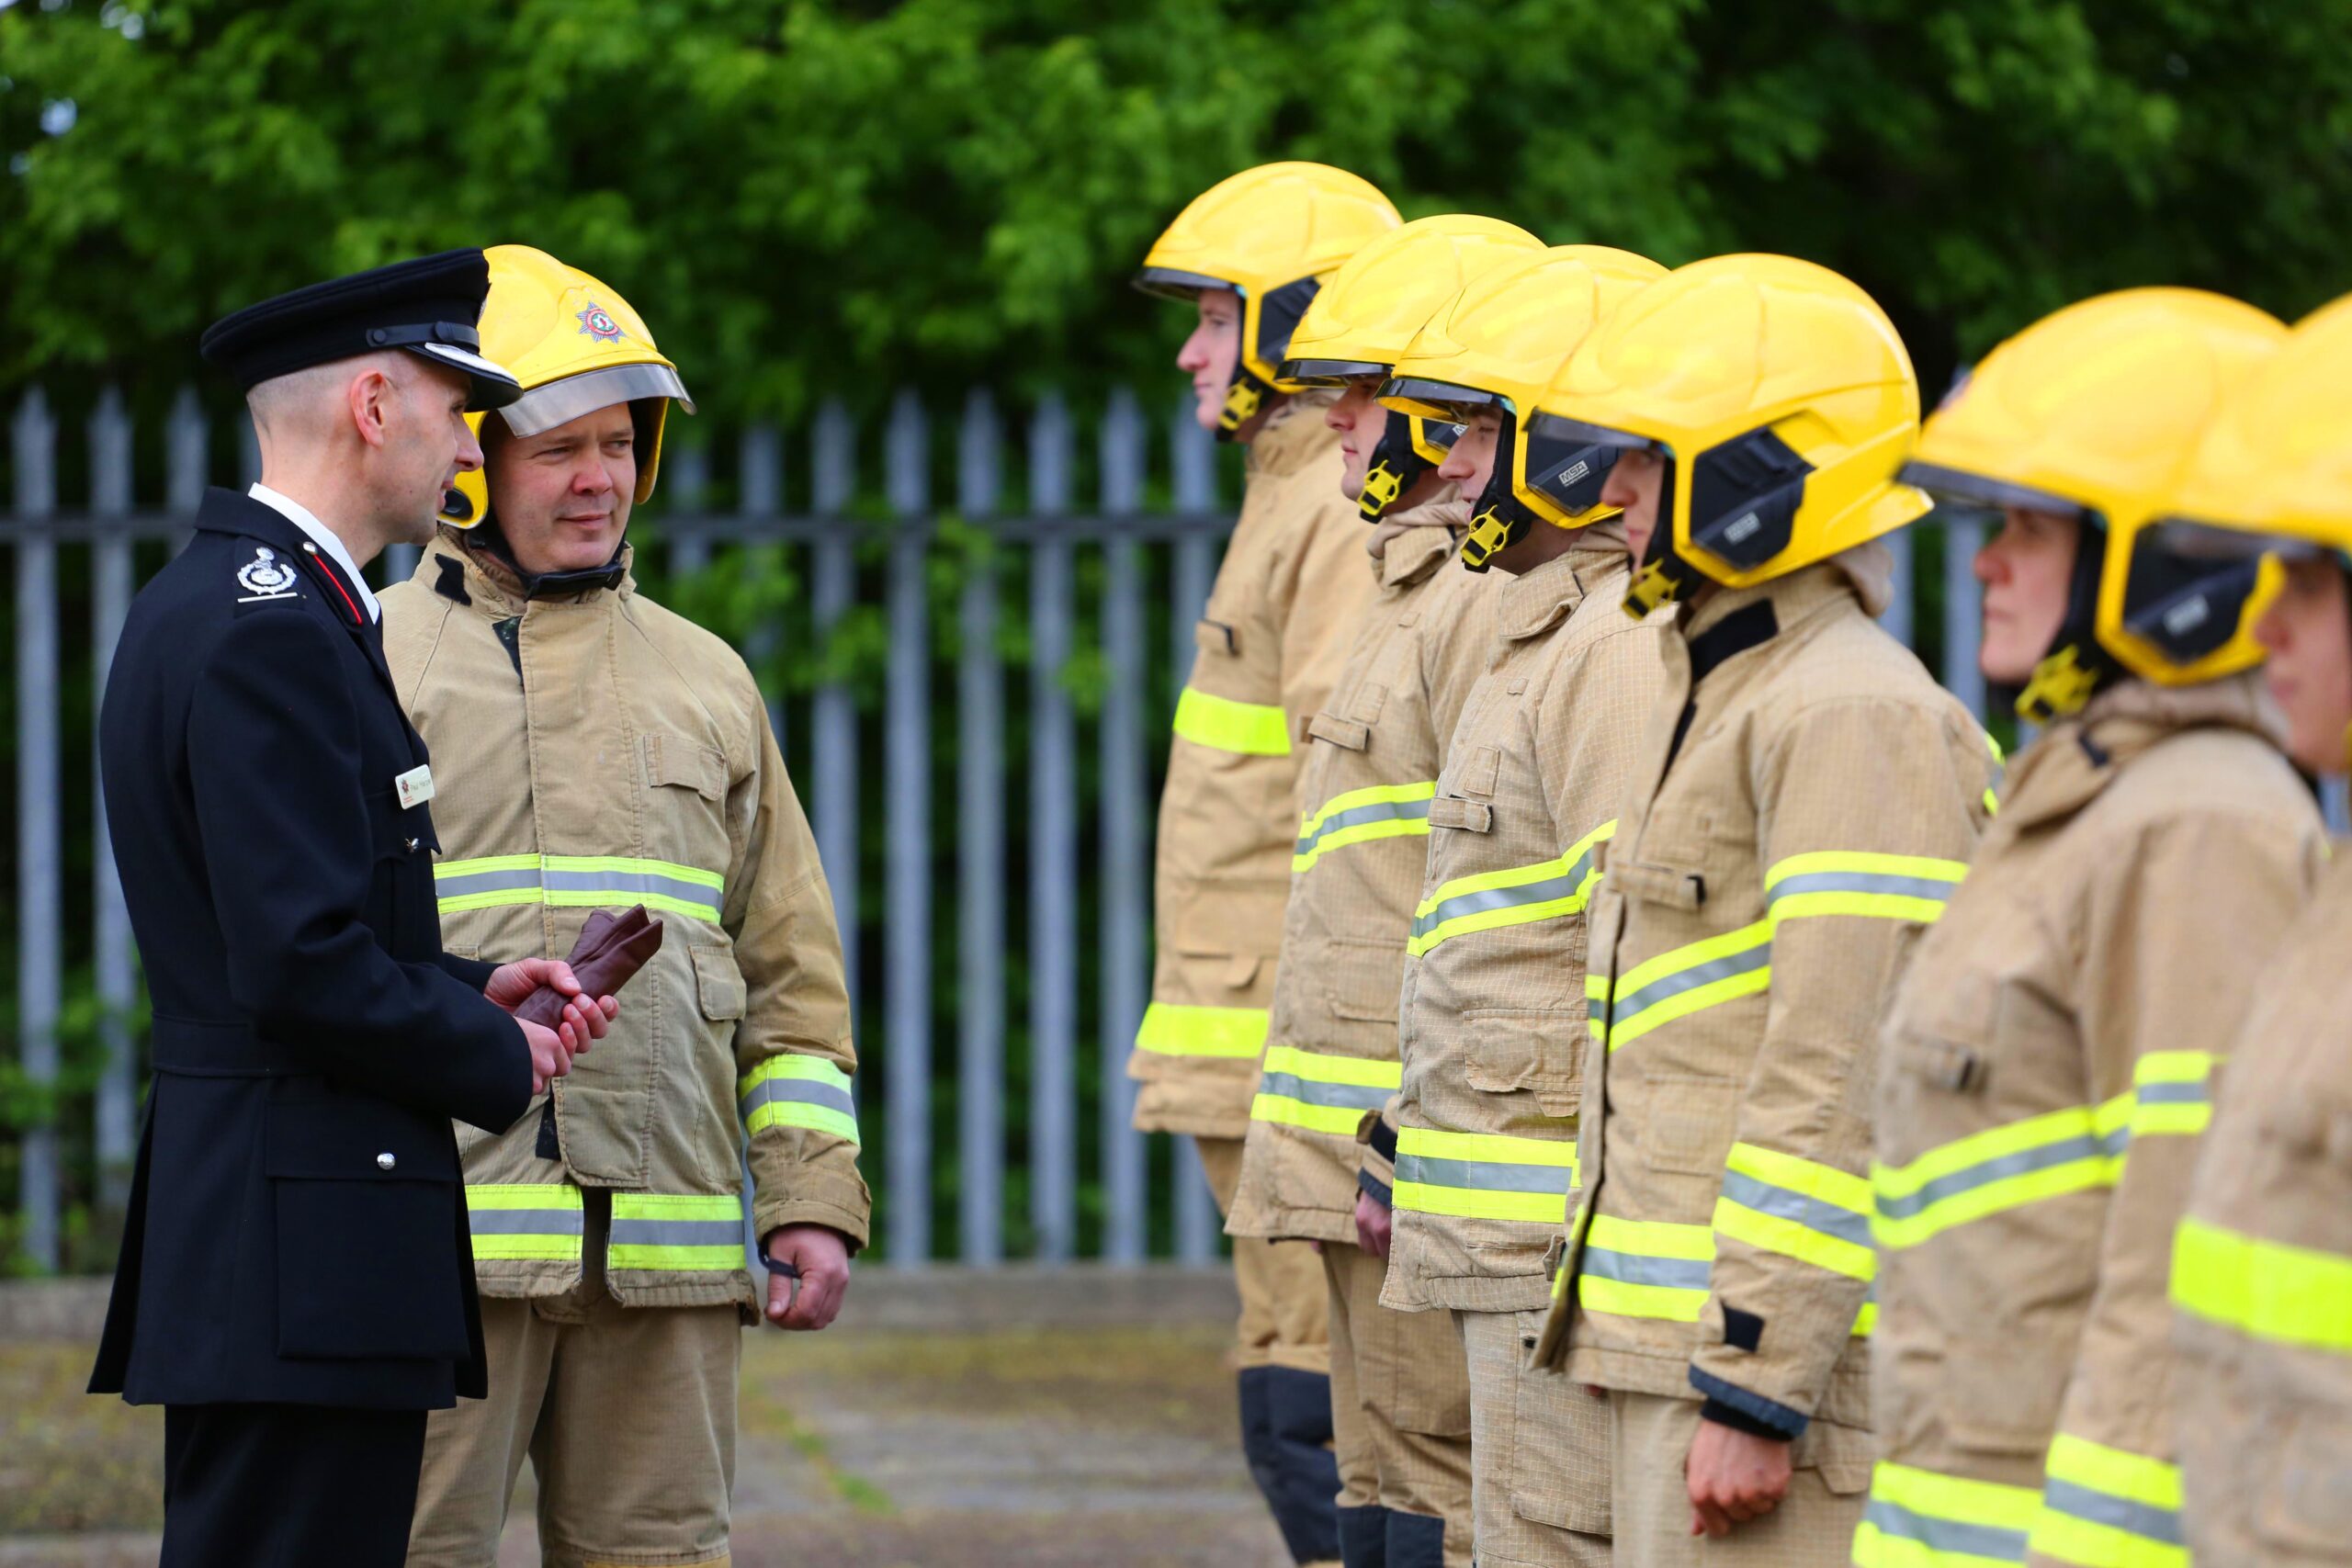 Deputy Chief Fire Officer Harper talking to Trainee Firefighters on parade